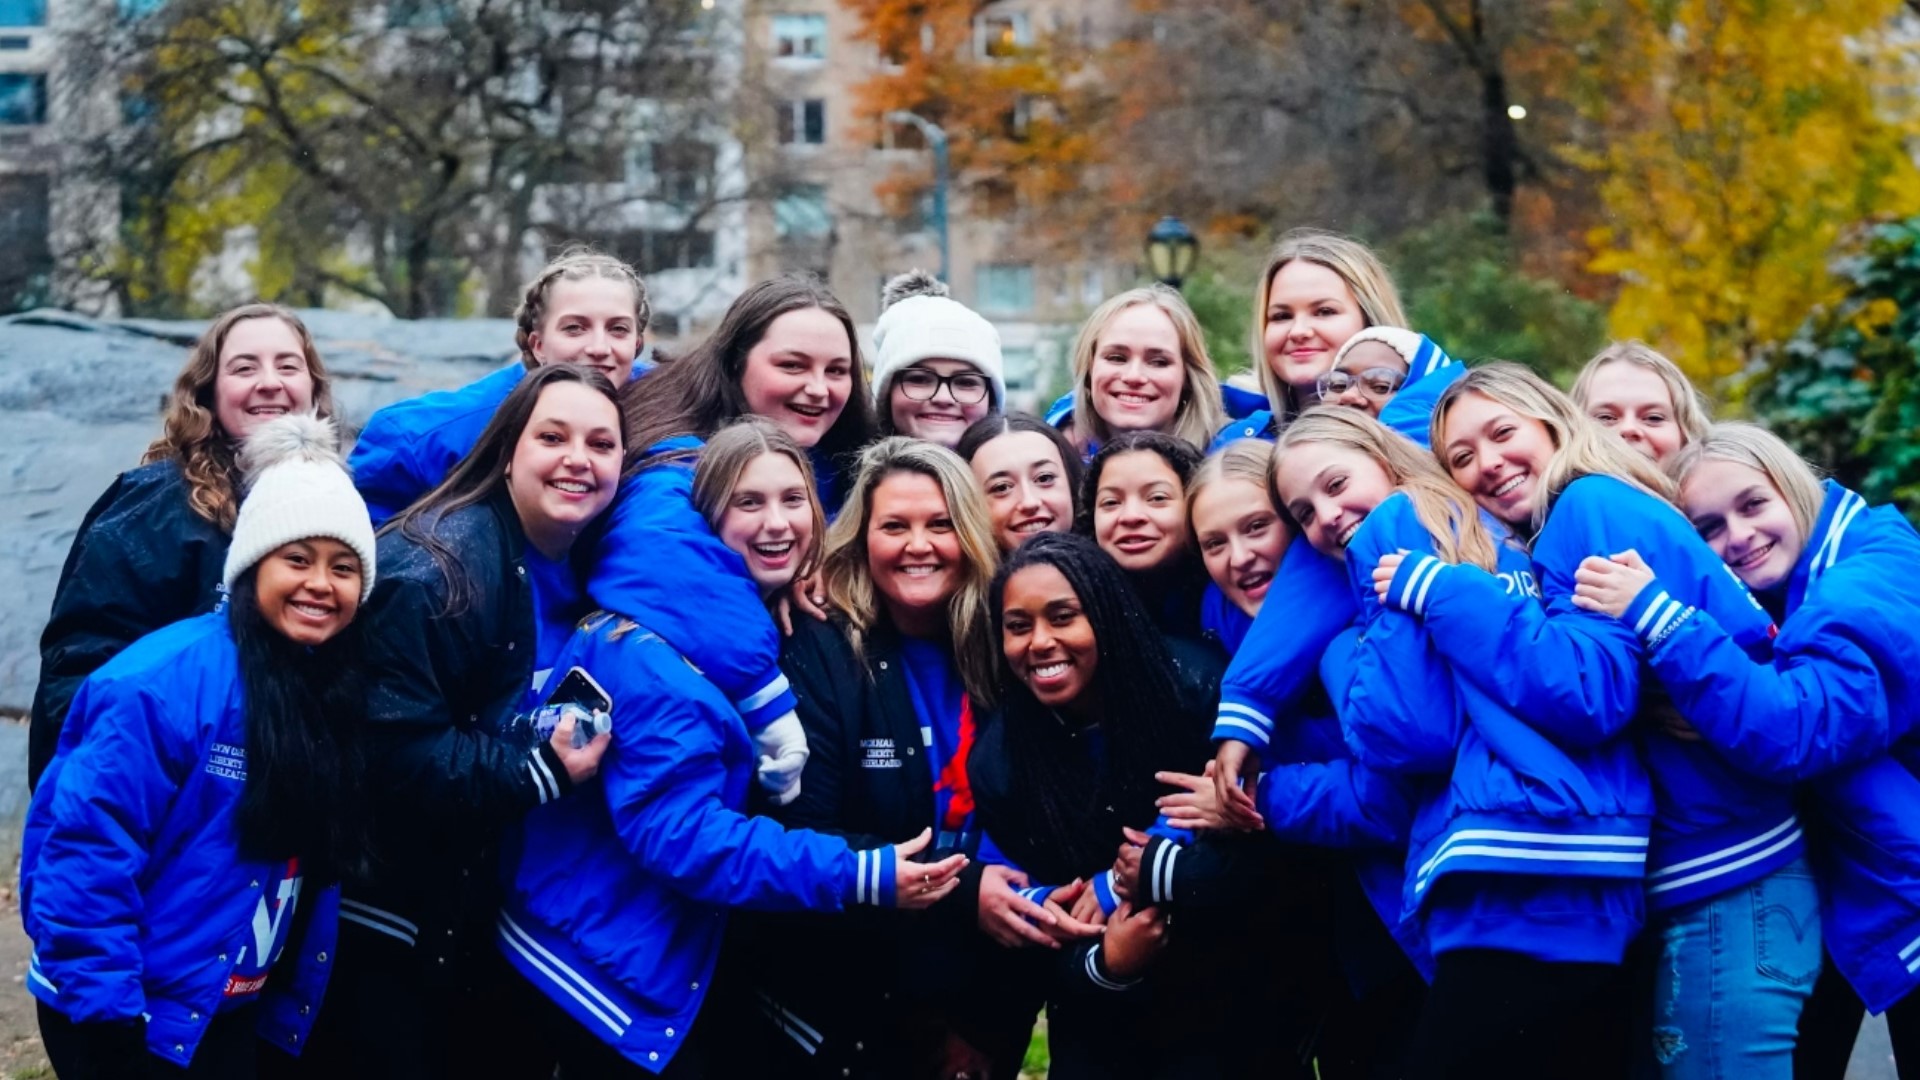 Fifteen members of the Liberty High School cheer team got the incredible opportunity to perform at the parade in NYC Thursday morning.